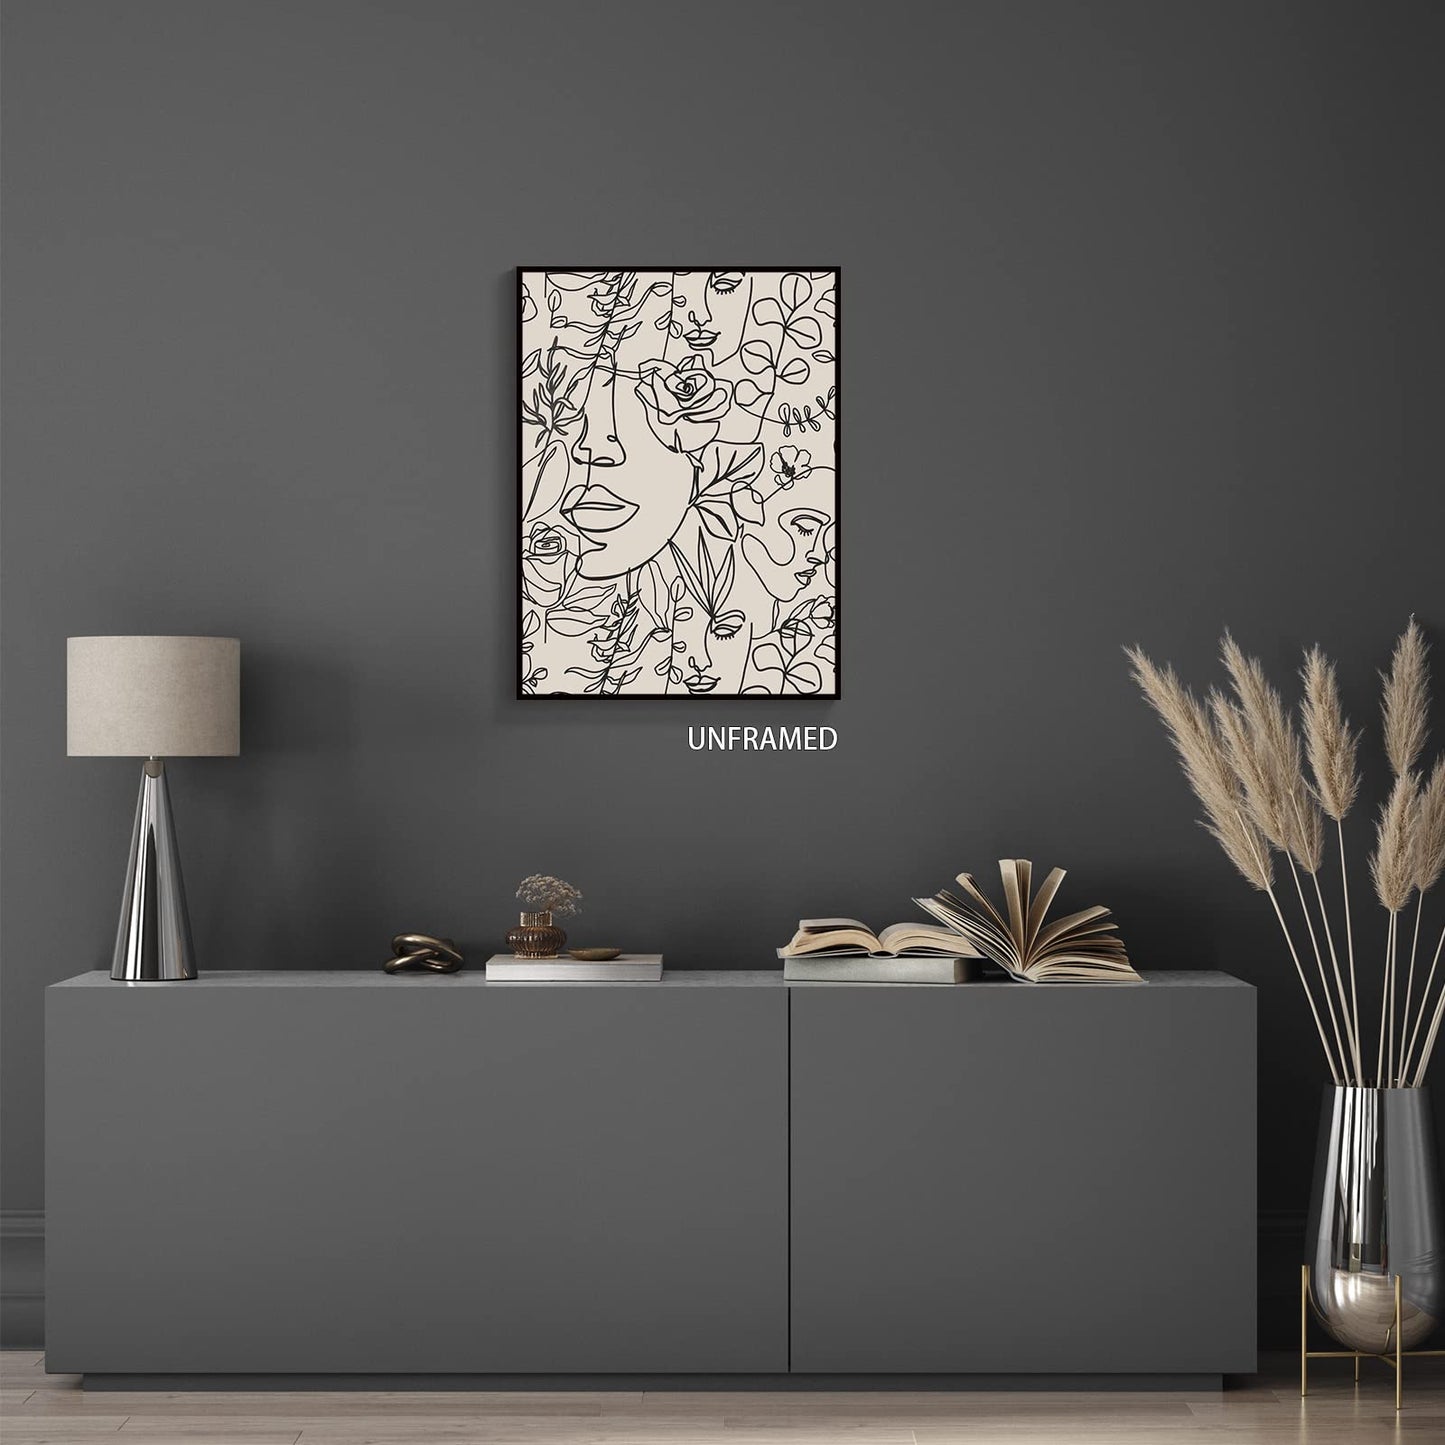 Modern Abstract Women Faces Canvas Wall Art Minimalist Line Boho Botanical Flower Aesthetic Posters Contemporary Black Female Floral Drawing Prints Paintings Decor for Girls Bedroom 12x16in Unframed